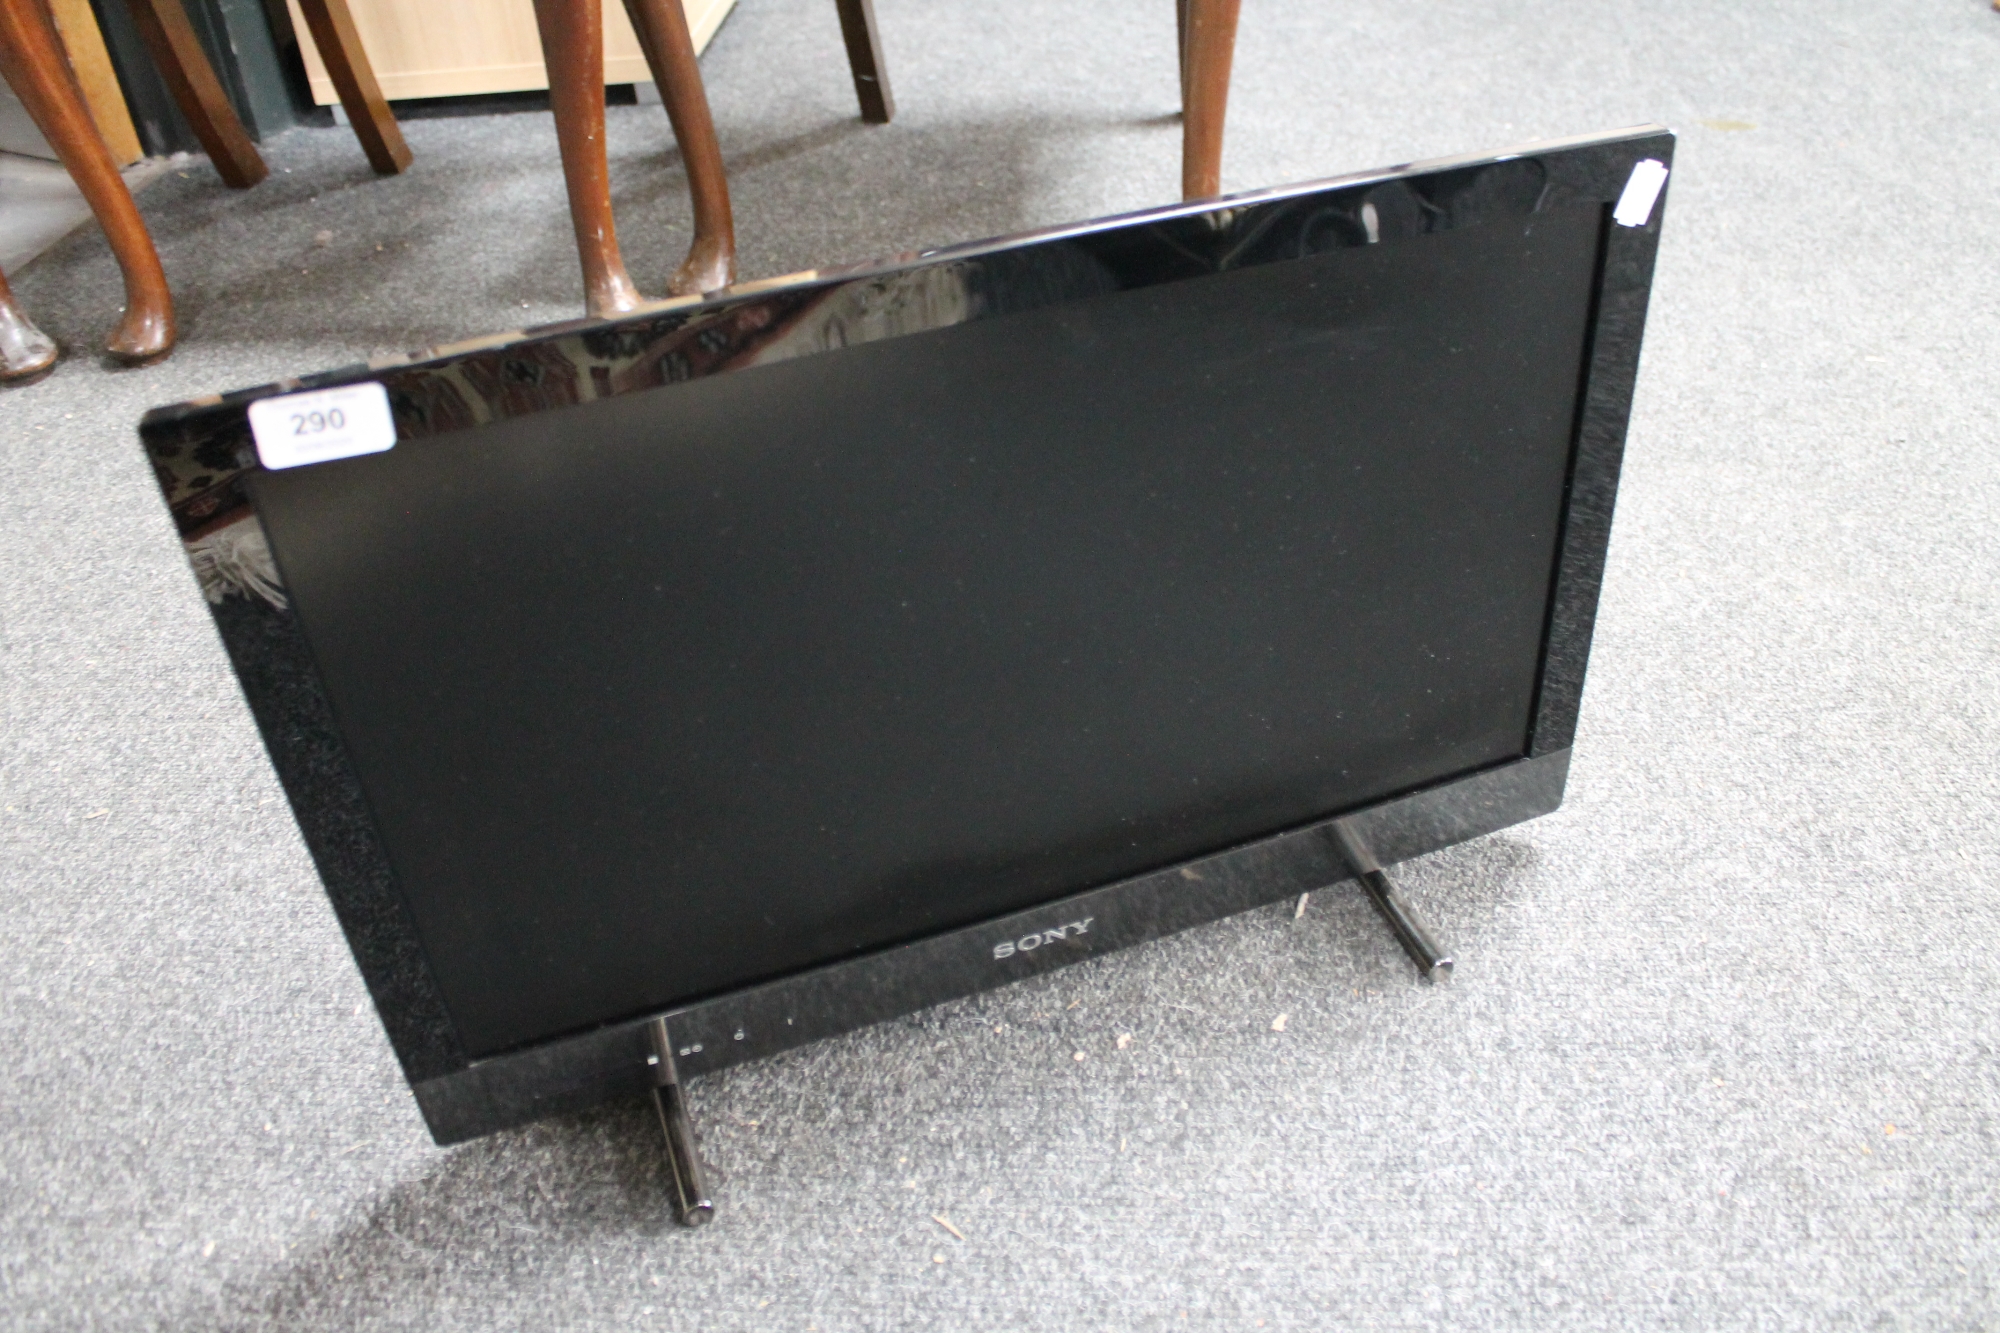 A Sony Bravia 22" TV with lead,